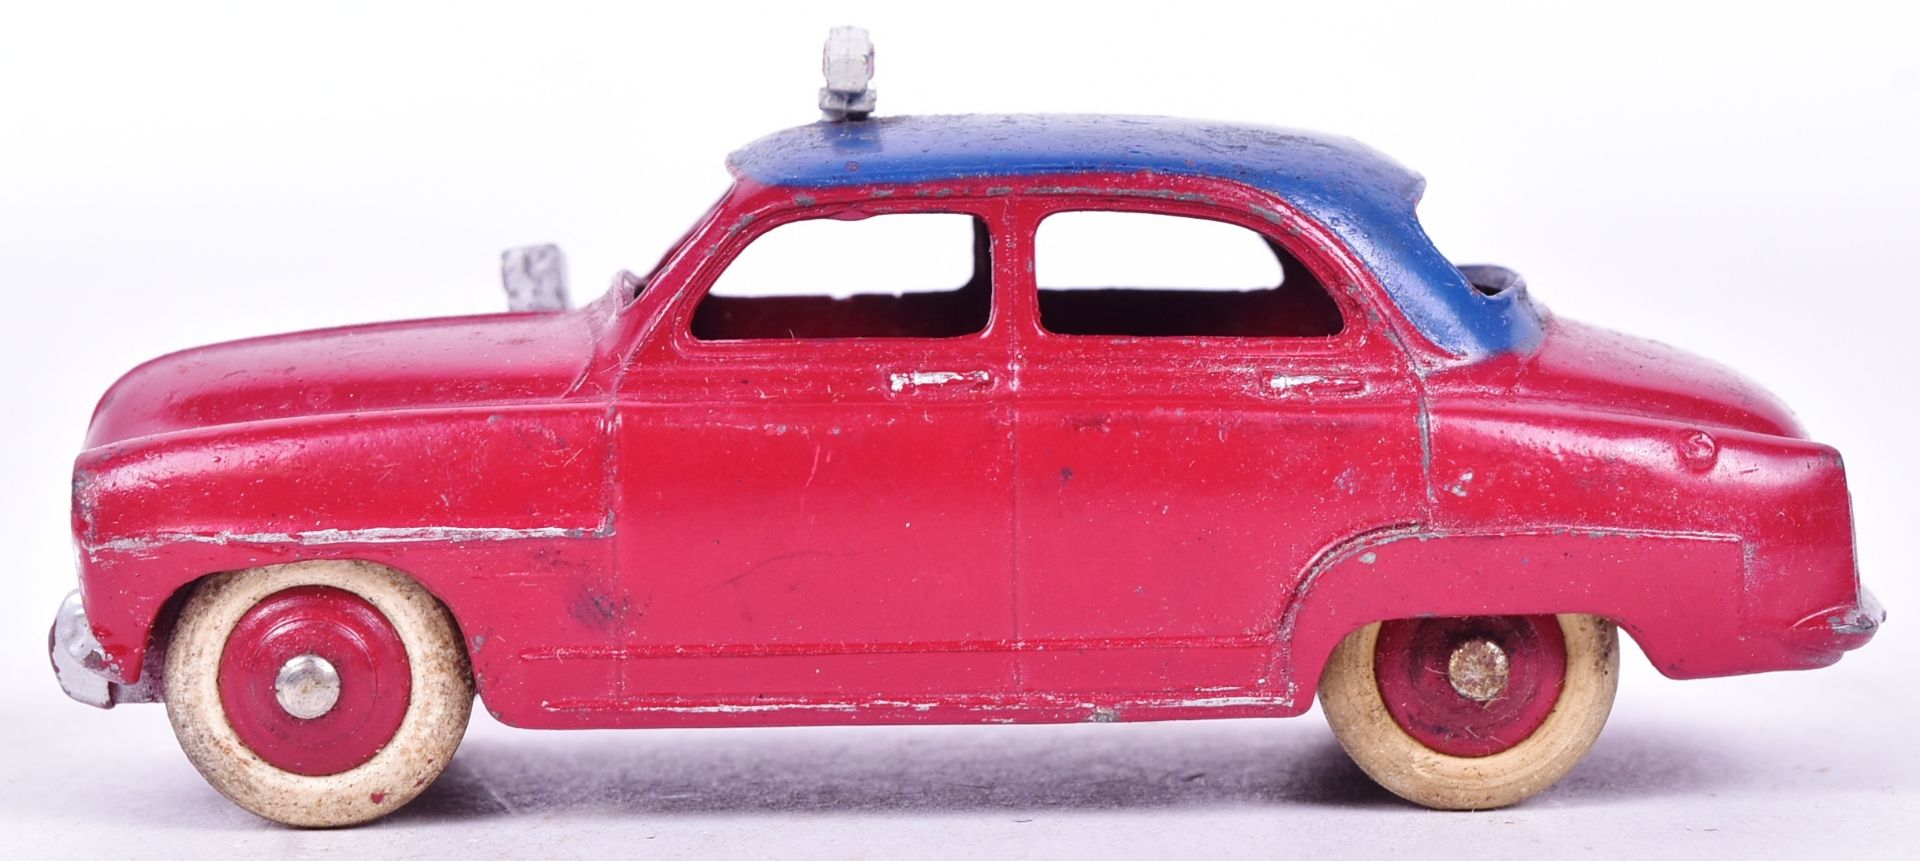 DIECAST - FRENCH DINKY TOYS - SIMCA 9 ARONDE - Image 2 of 5